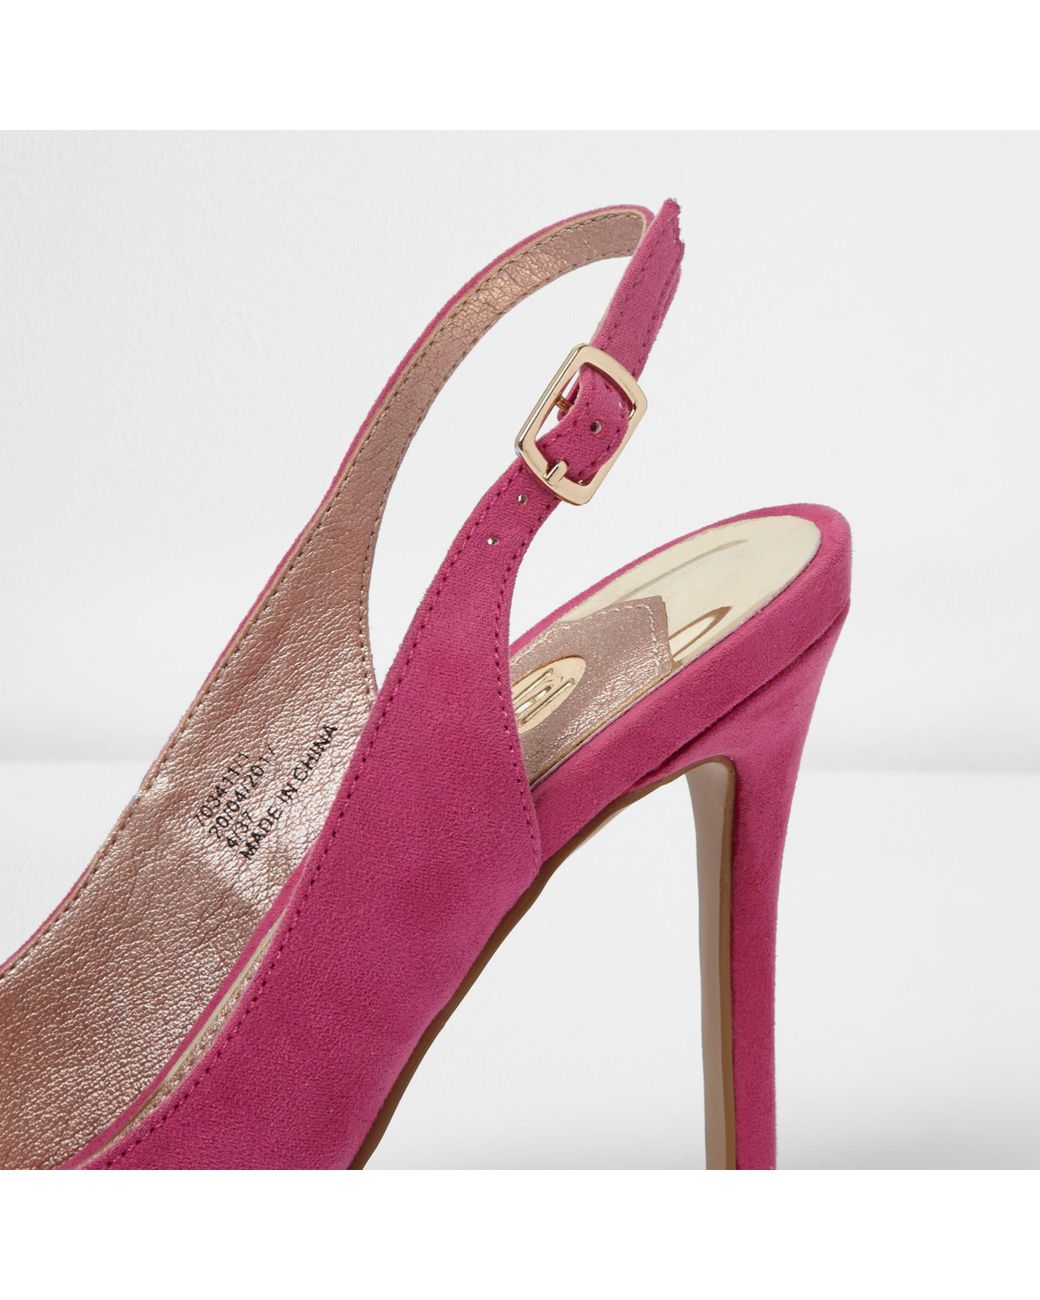 River Island Women's Pink Slingback Court Shoes